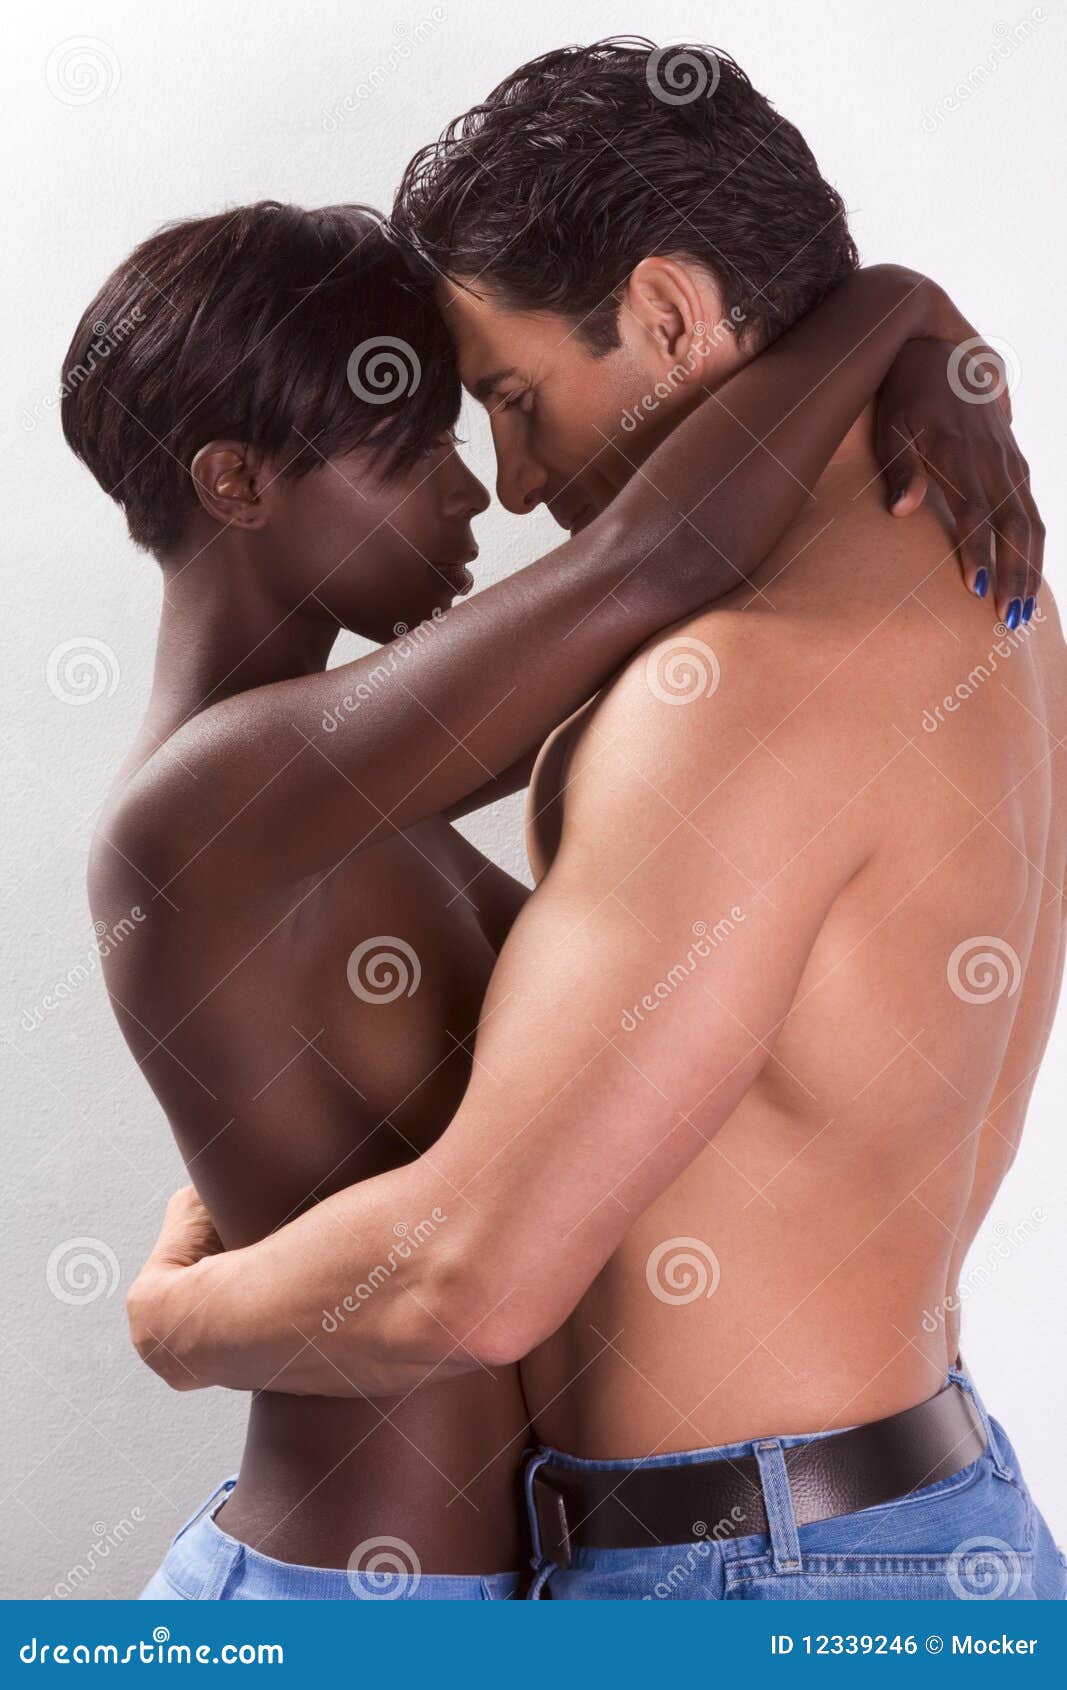 Black naked man and woman